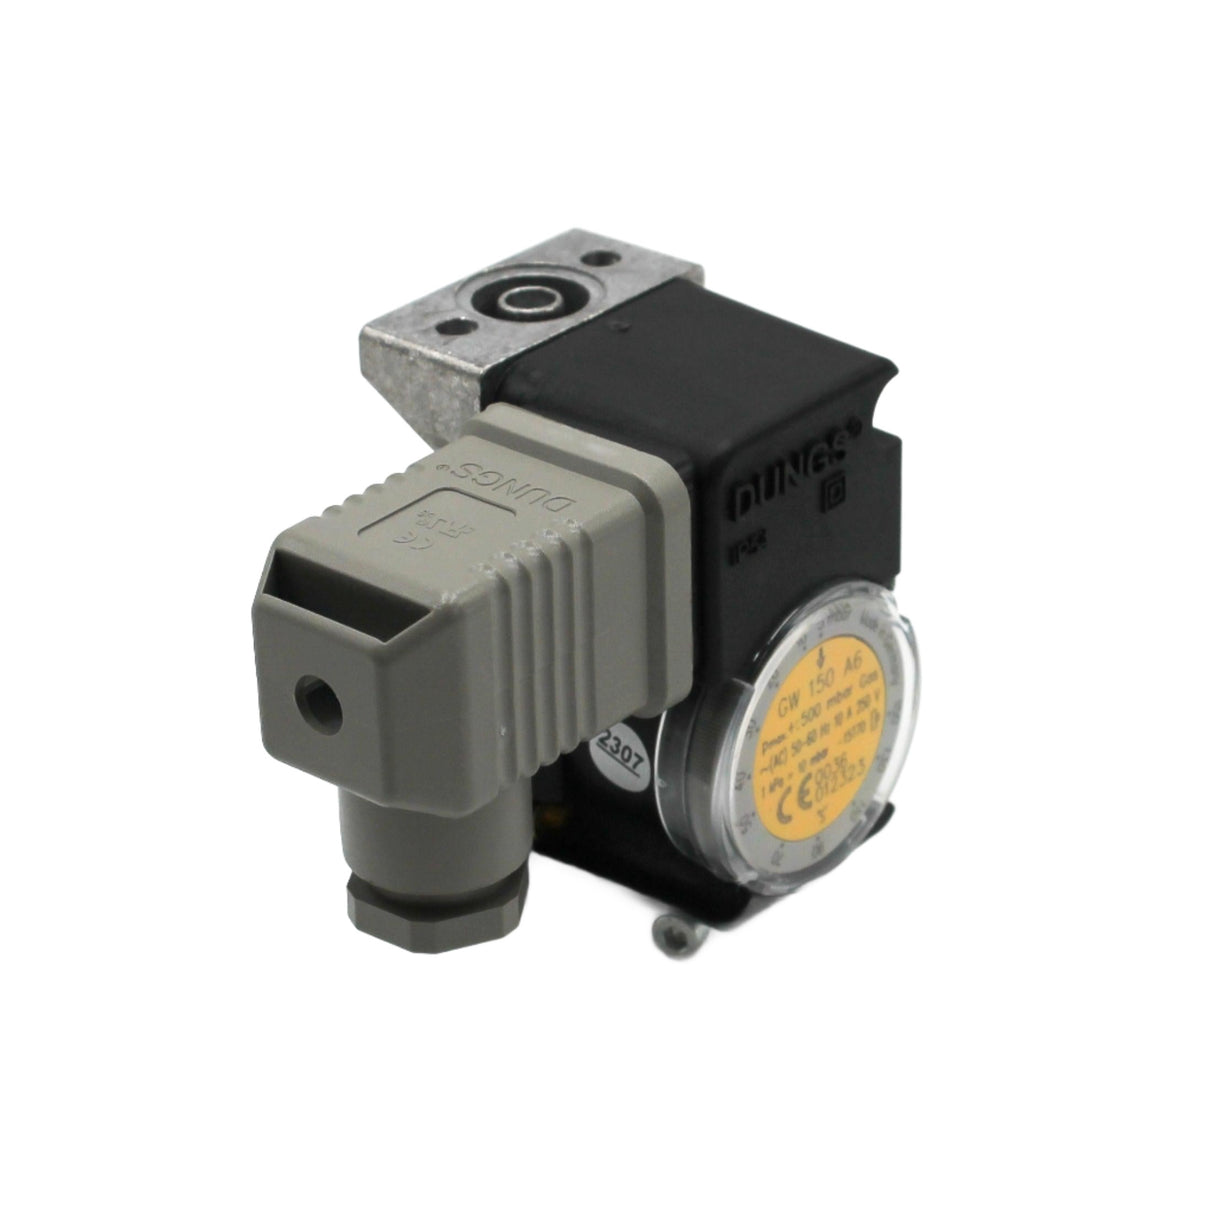 Dungs GW50 A6 5-50 mbar Compact Pressure Switch